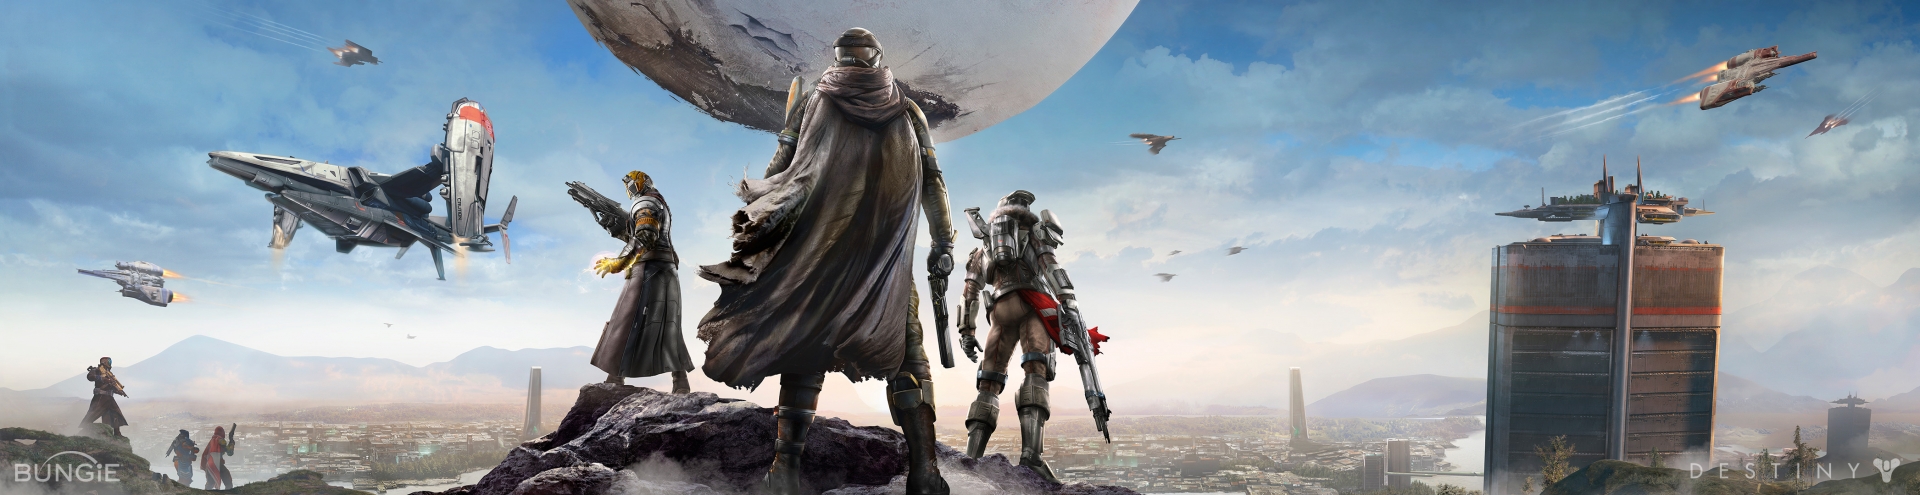 Bungie S Destiny Is One Of The Most Awaited And Highly Anticipated